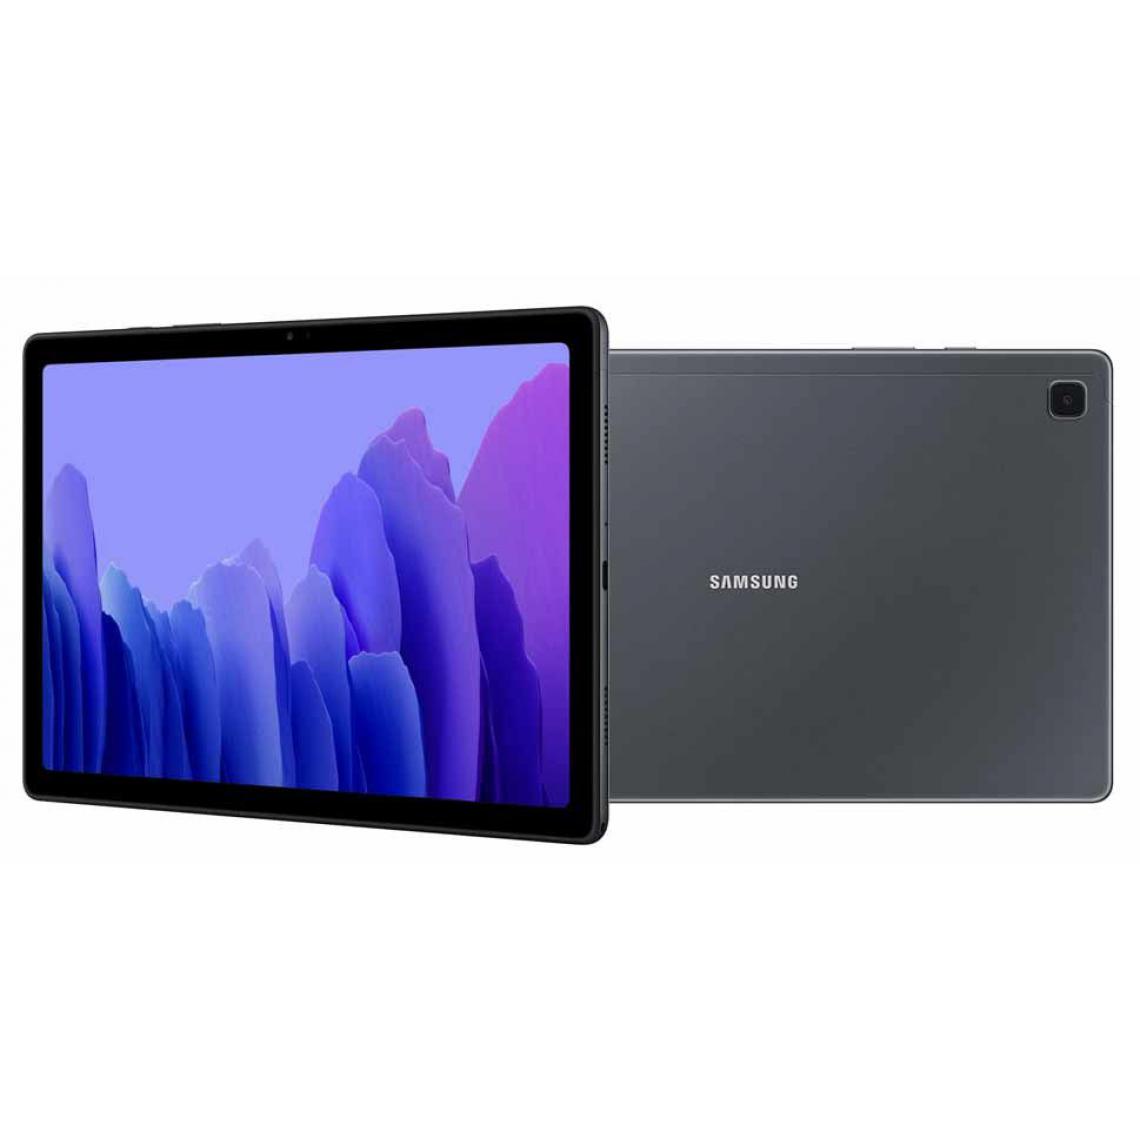 Samsung - Tablette tactile Galaxy Tab A7 10.4 wifi 4G 32Go gray SM-T505NZAAEU - Tablette Android